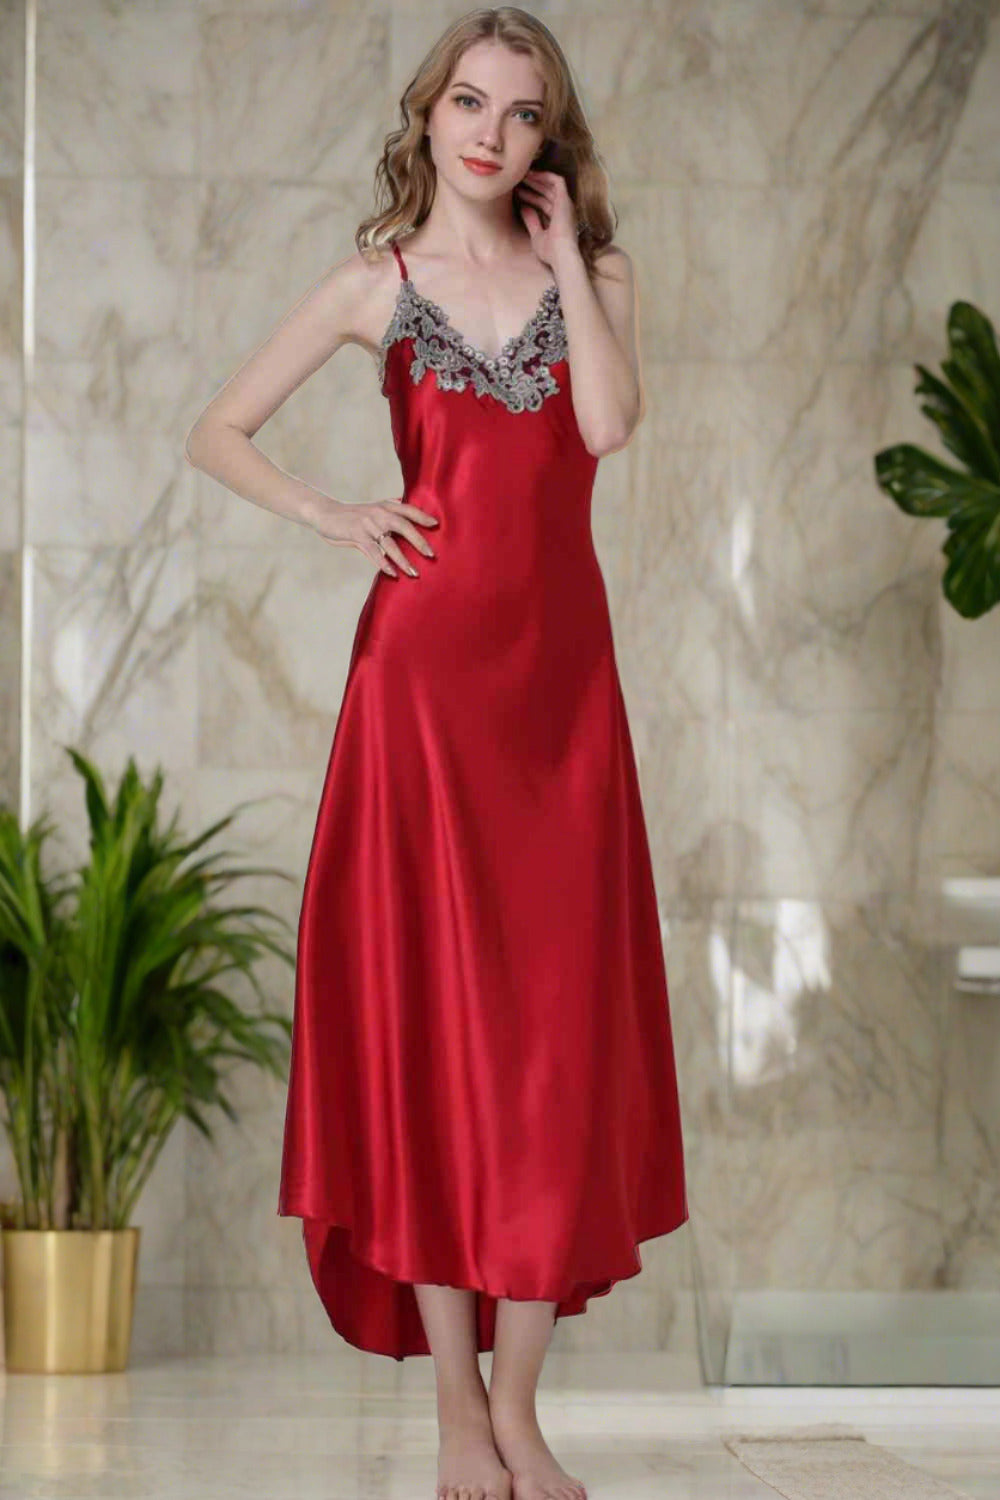 Model wearing red nightgown with lace trim